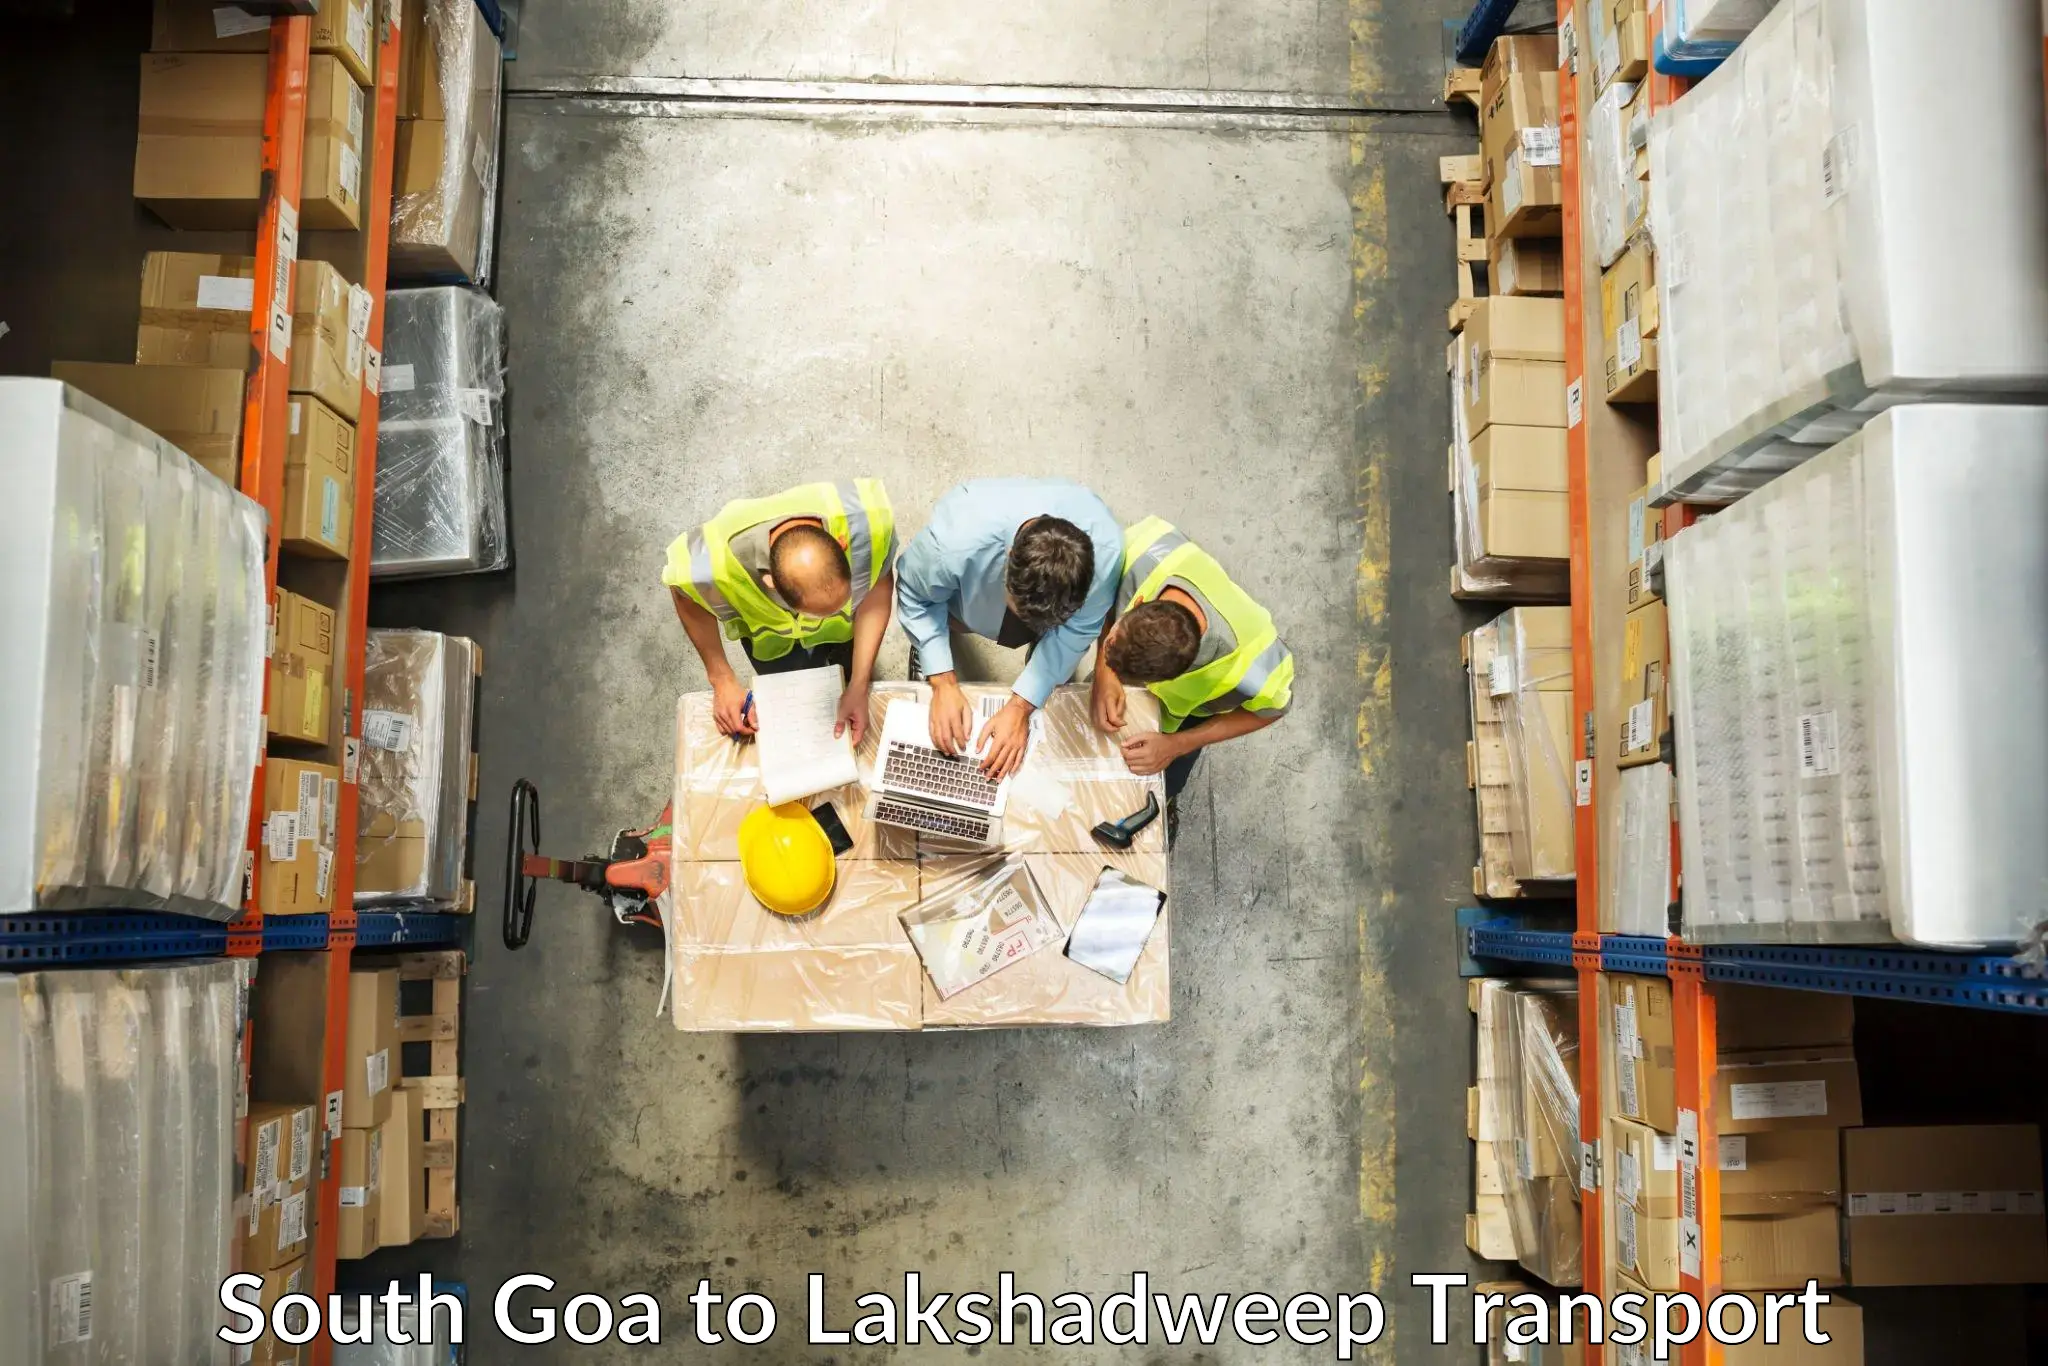 Part load transport service in India South Goa to Lakshadweep